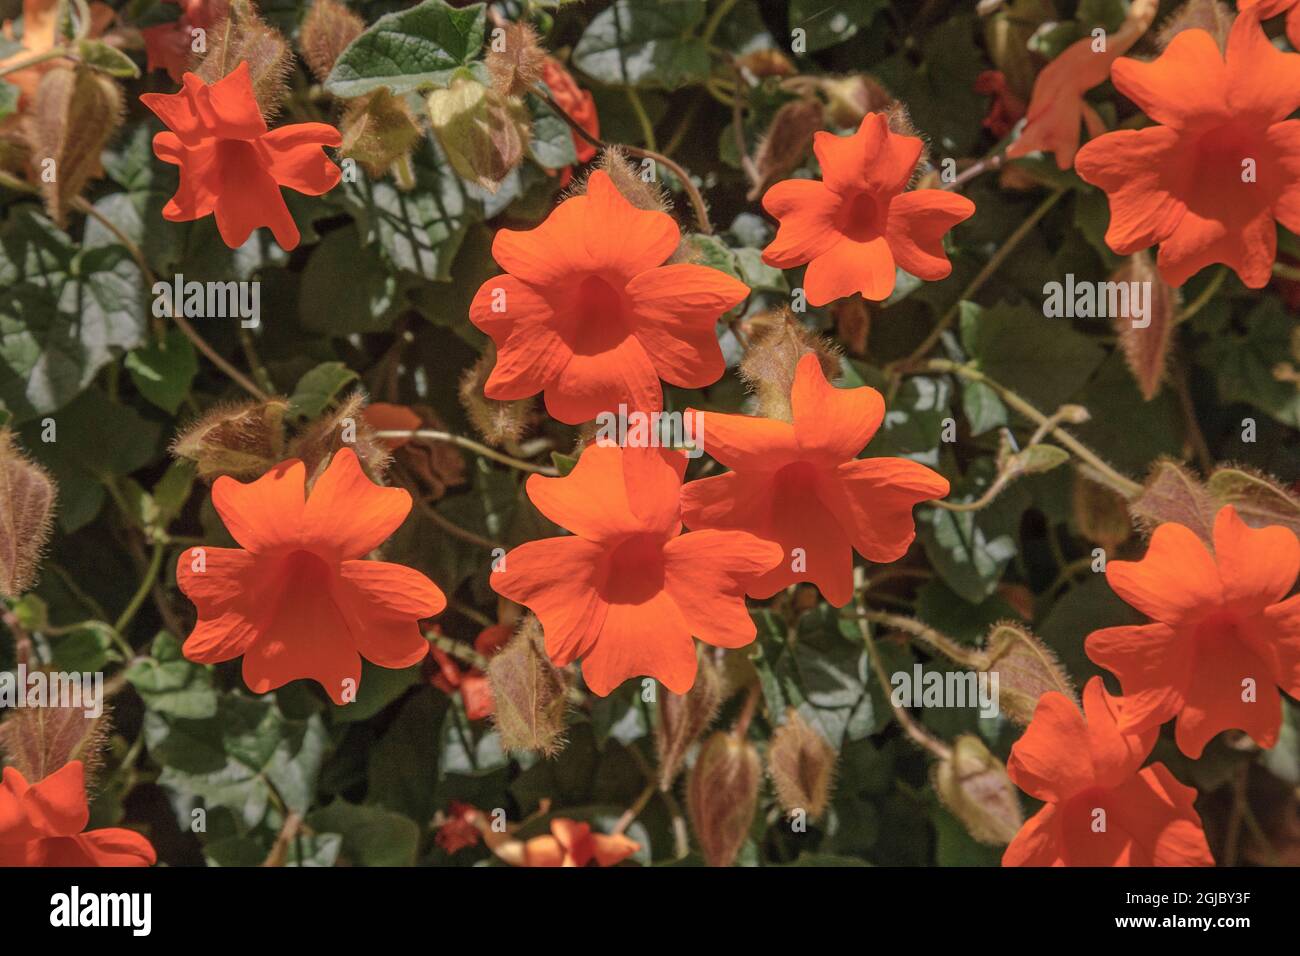 Mandevilla flowers covering a fence. Stock Photo